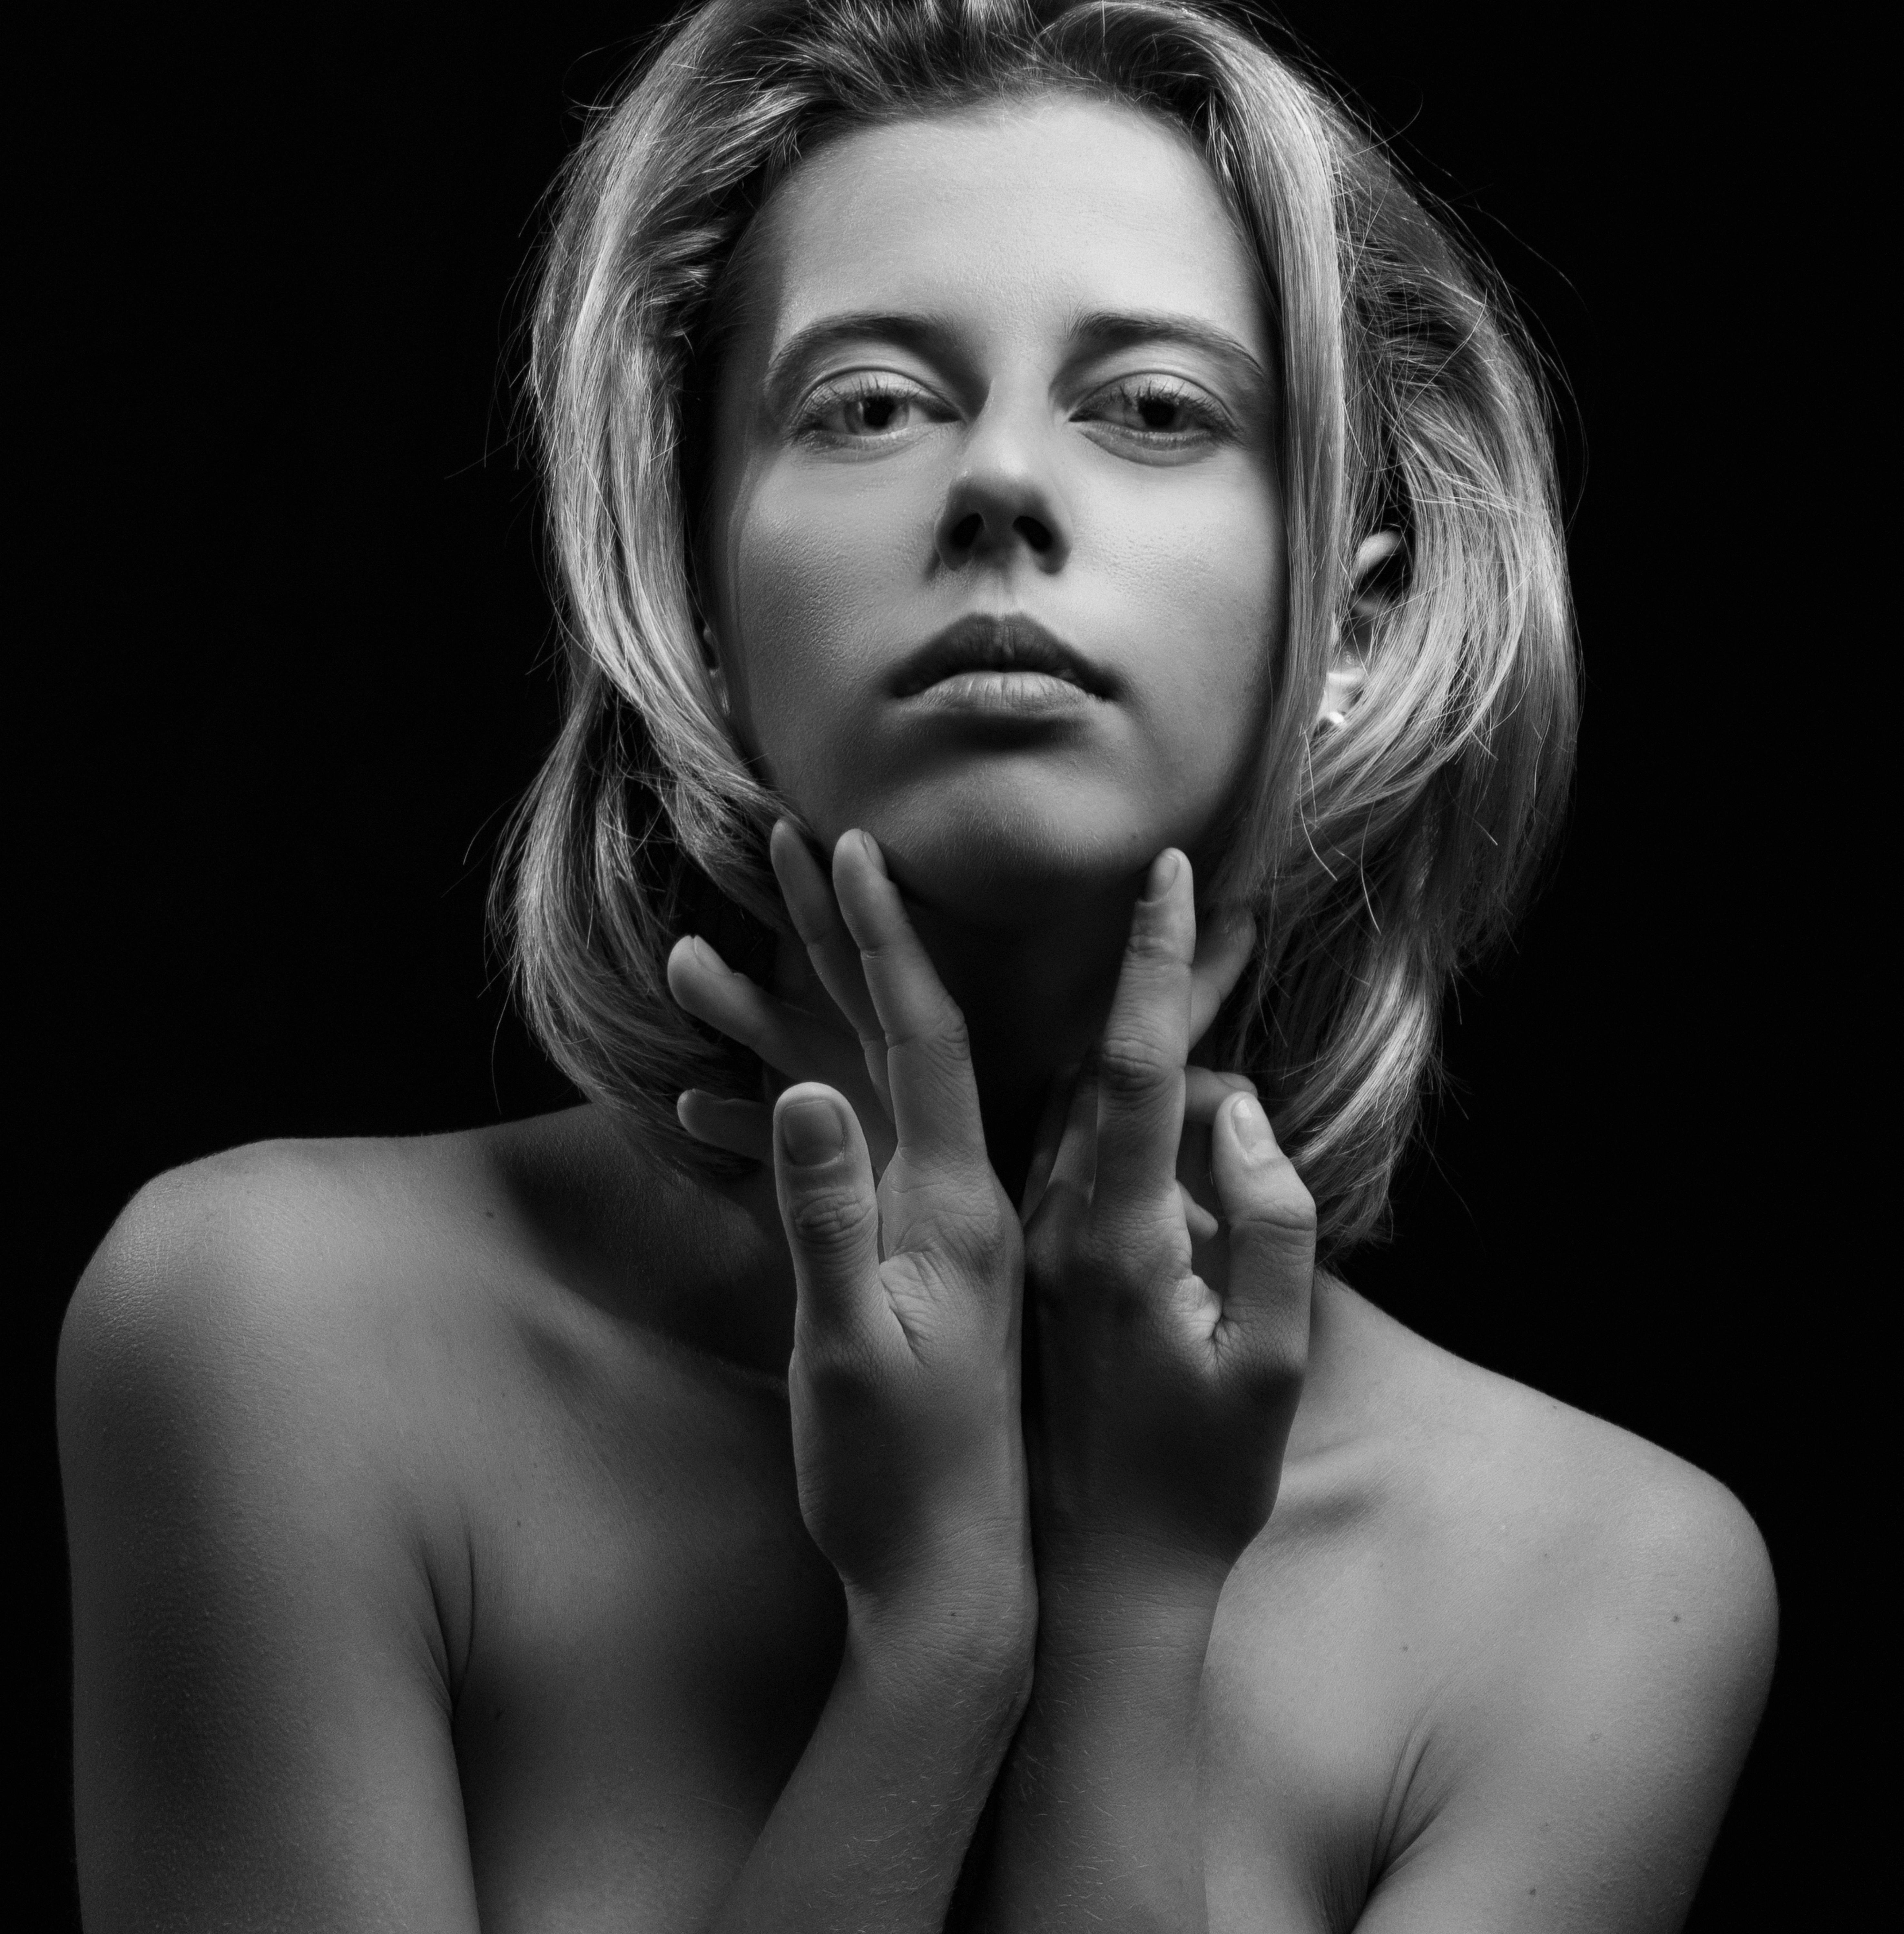 Woman Holding Breasts - Black and White - Free Stock Photo by Alexander  Krivitskiy on